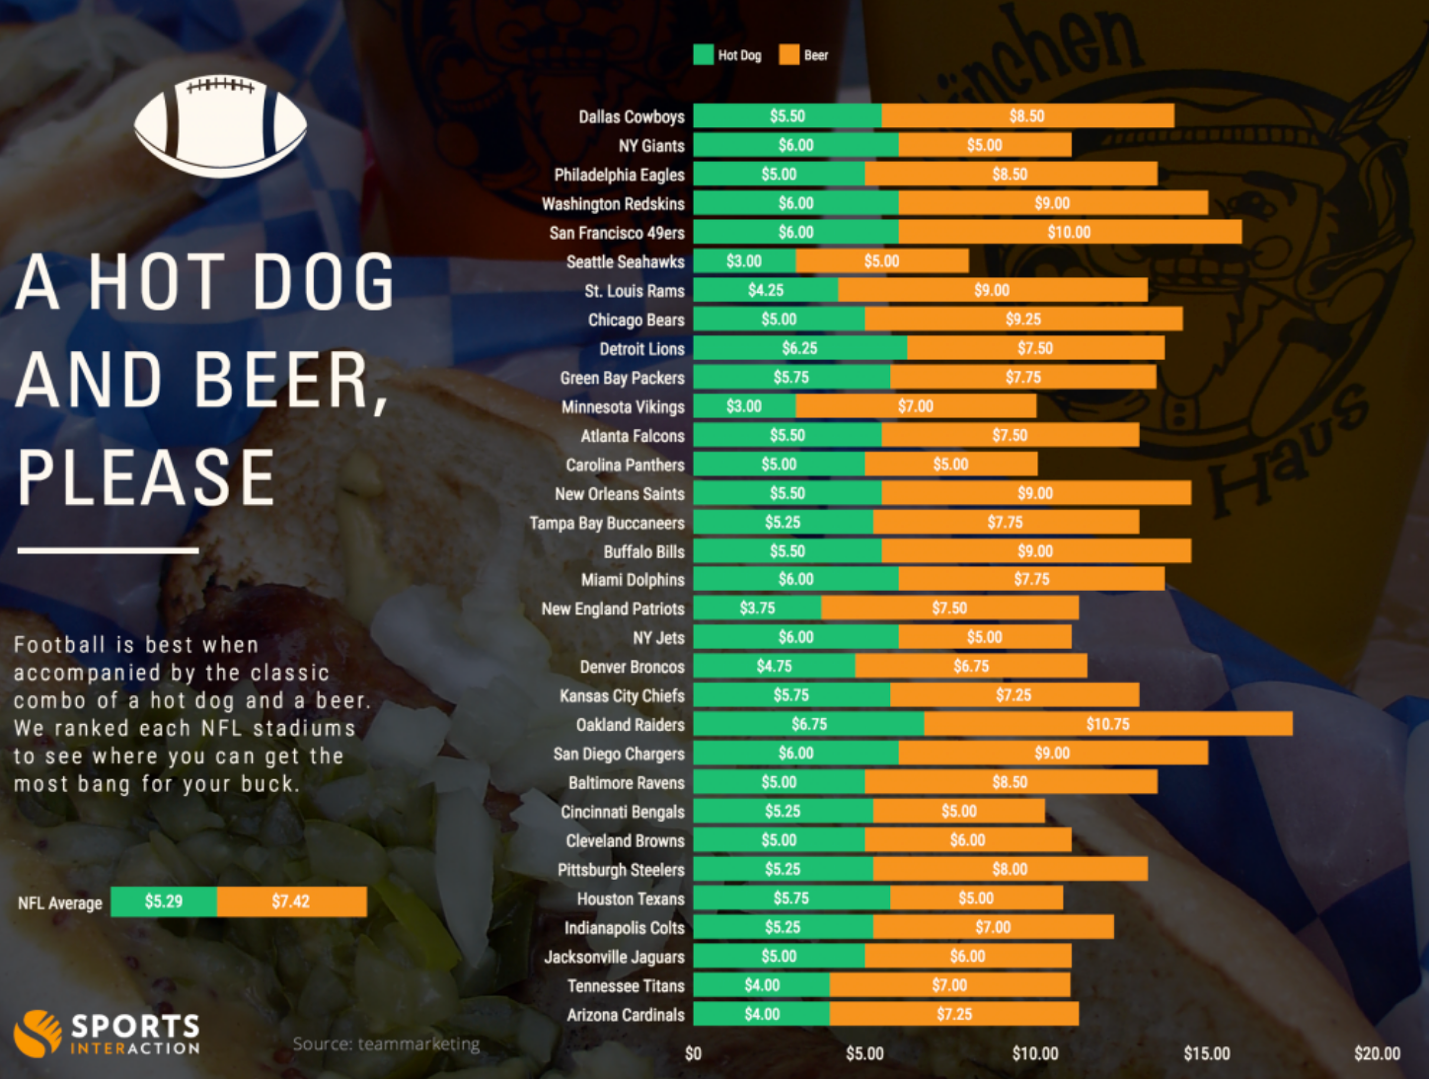 Hot Dog and Beer Prices at NFL Stadiums